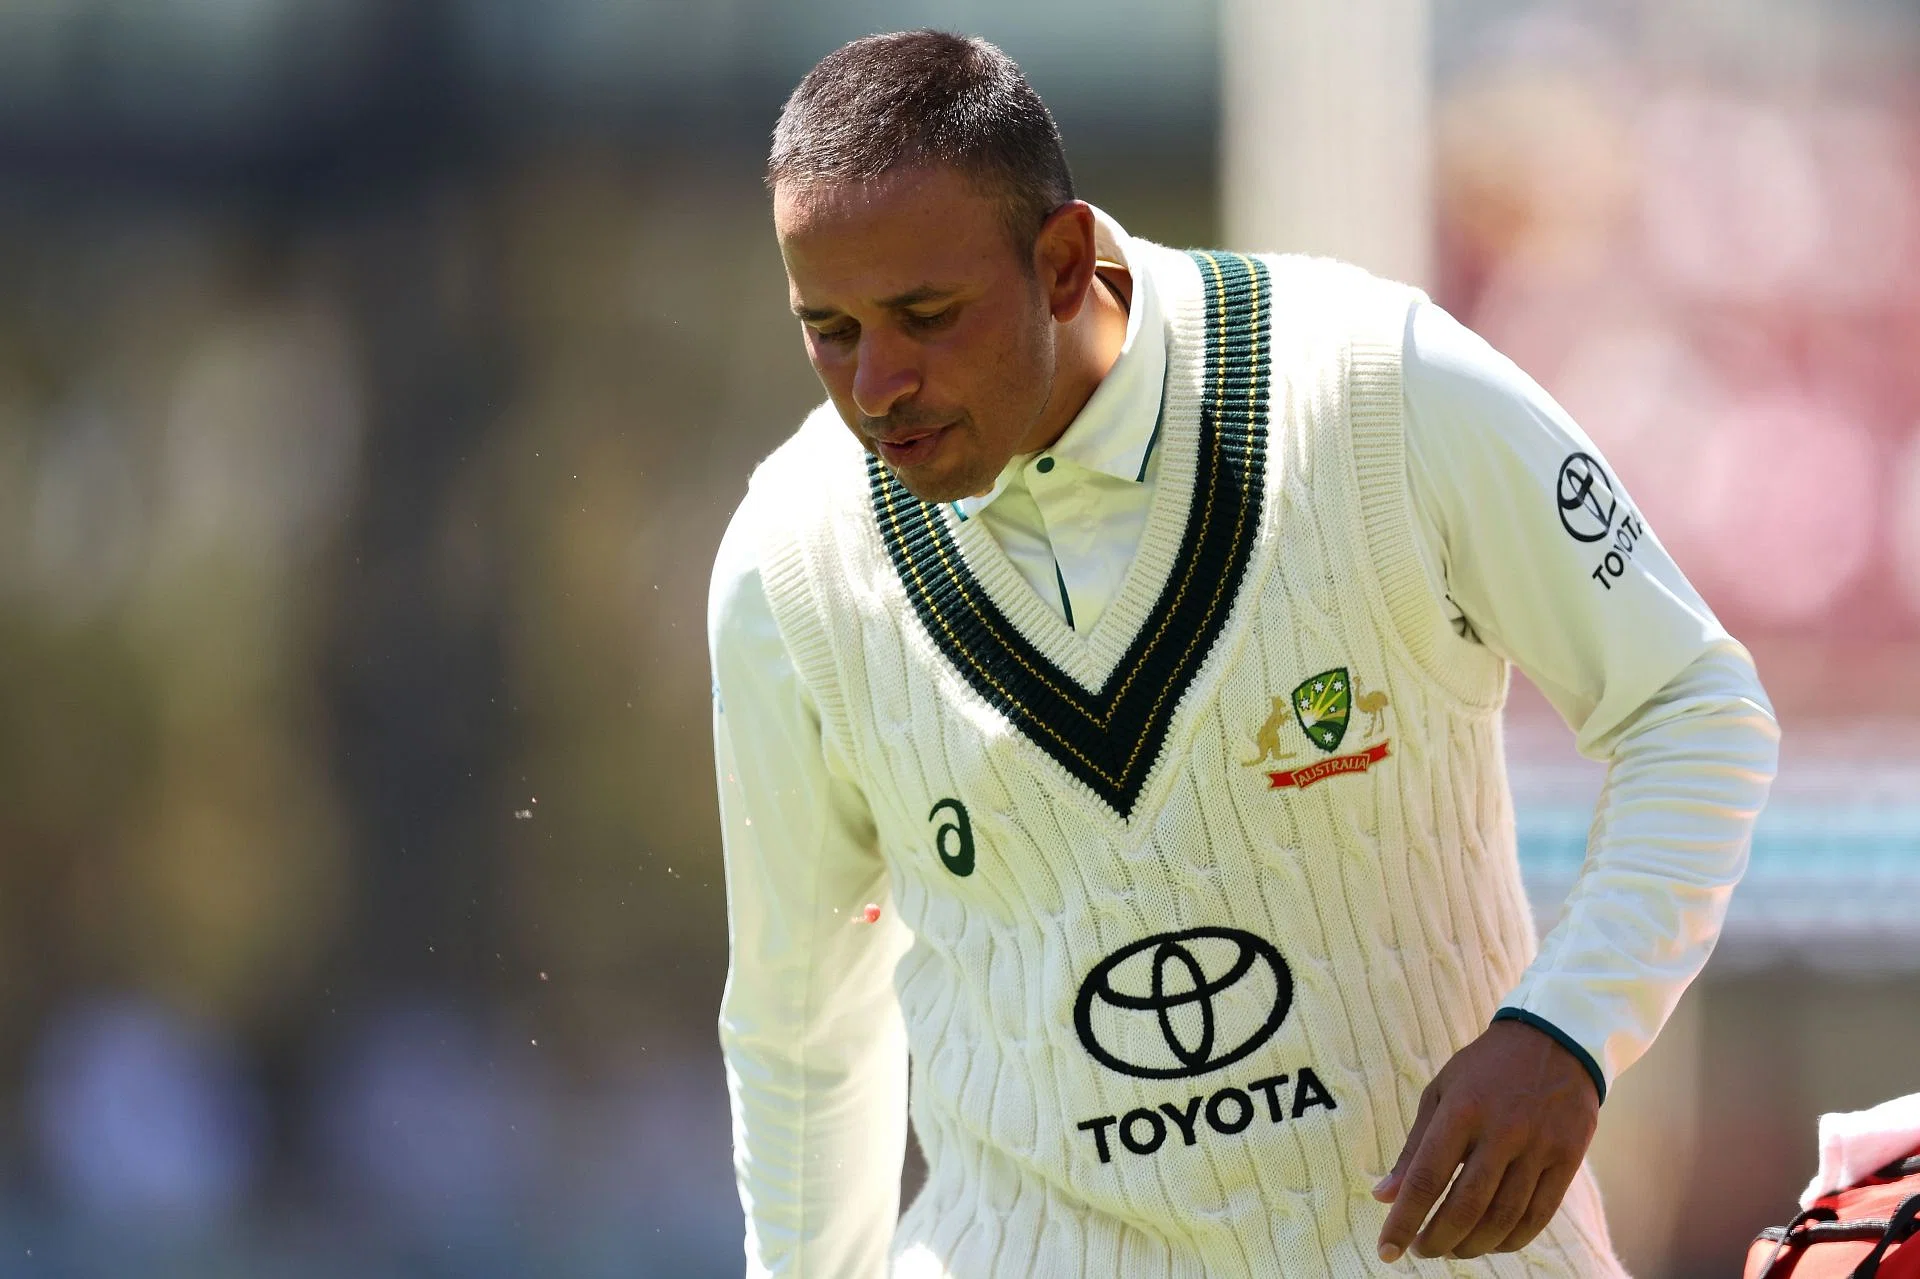 AUS vs WI: Usman Khawaja Cleared To Play Second Test After Delayed Concussion